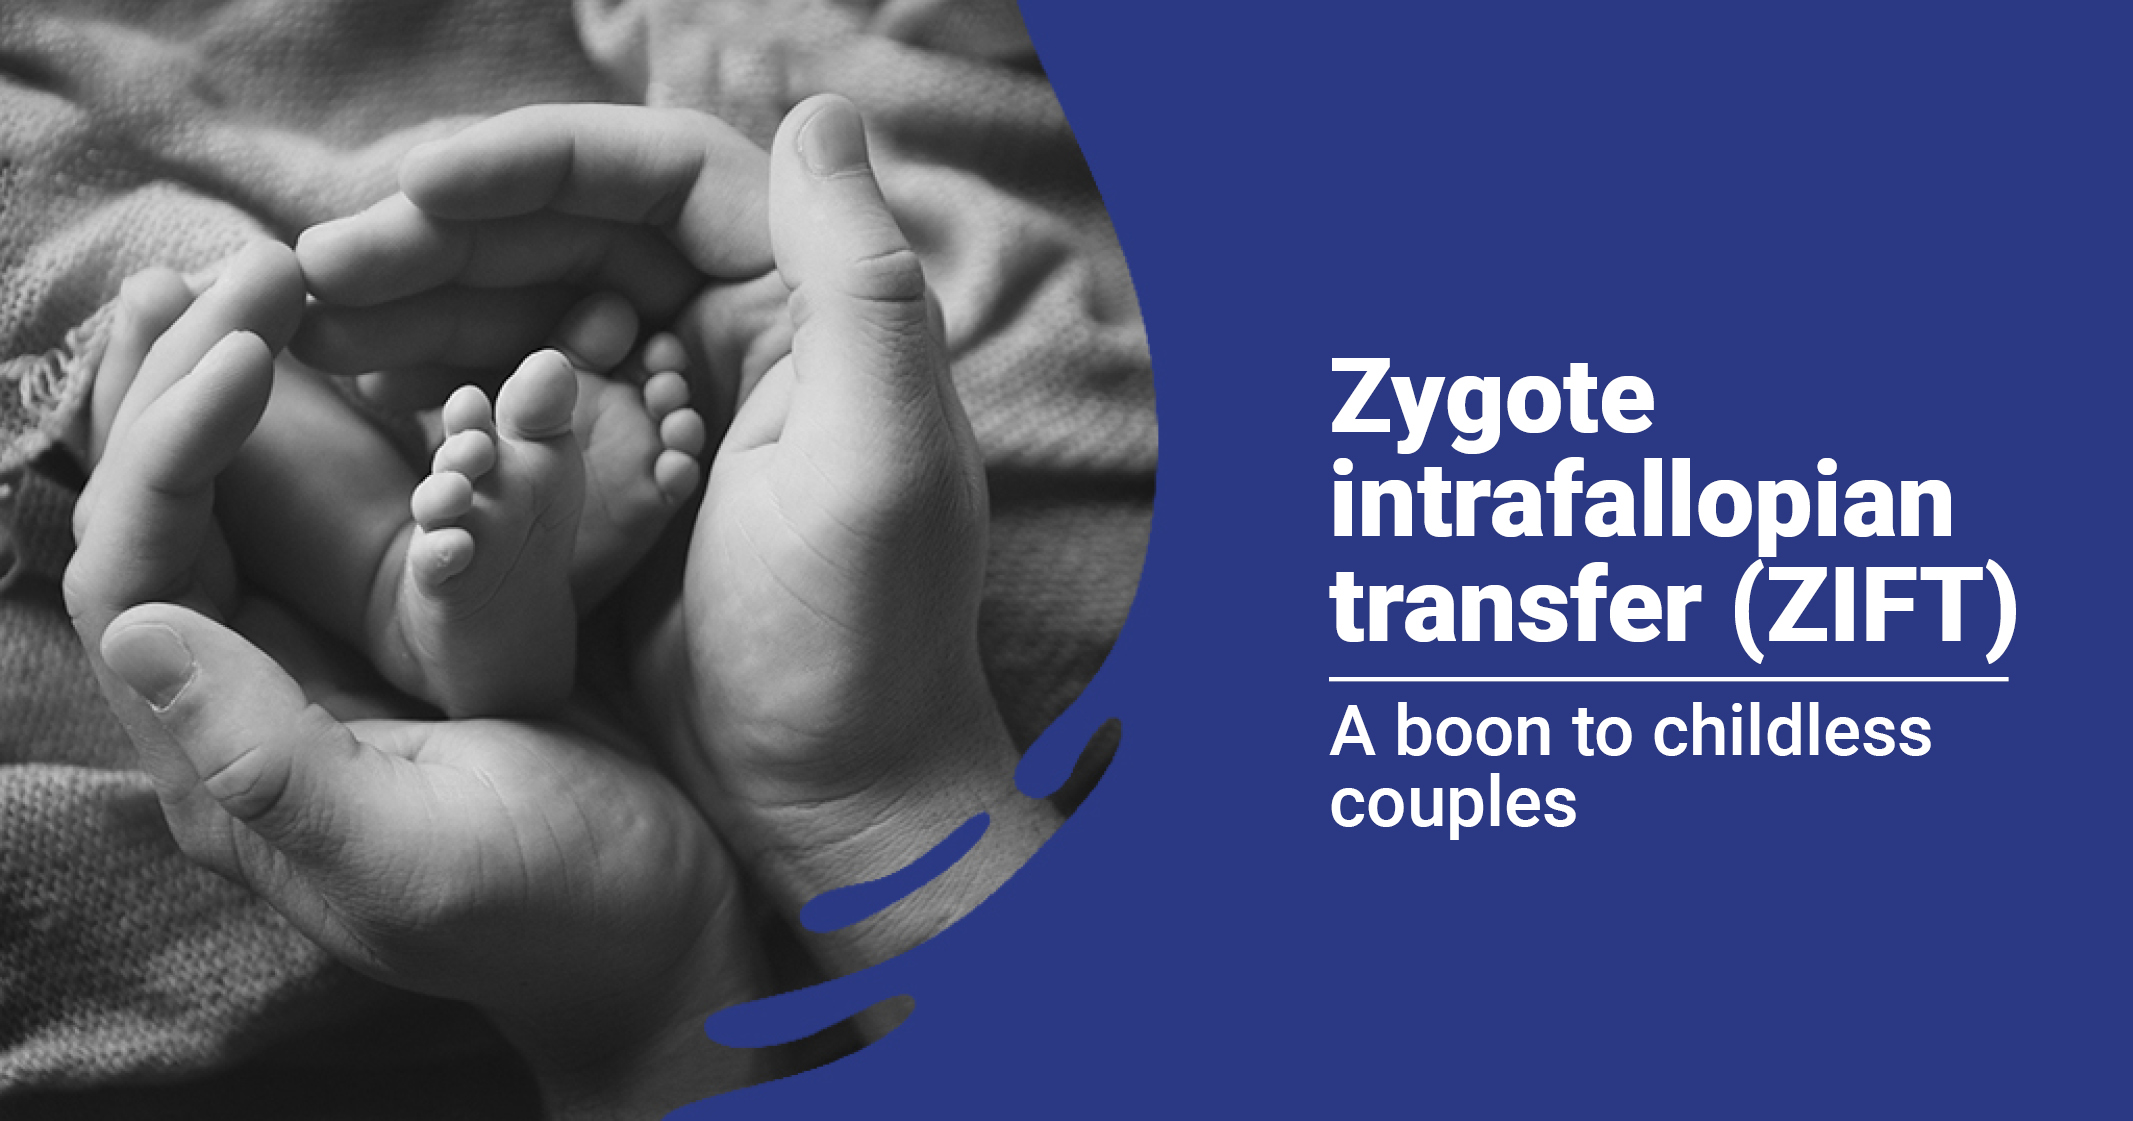 Infertility Solutions: Understanding IVF, ZIFT, and GIFT | Testbook.com